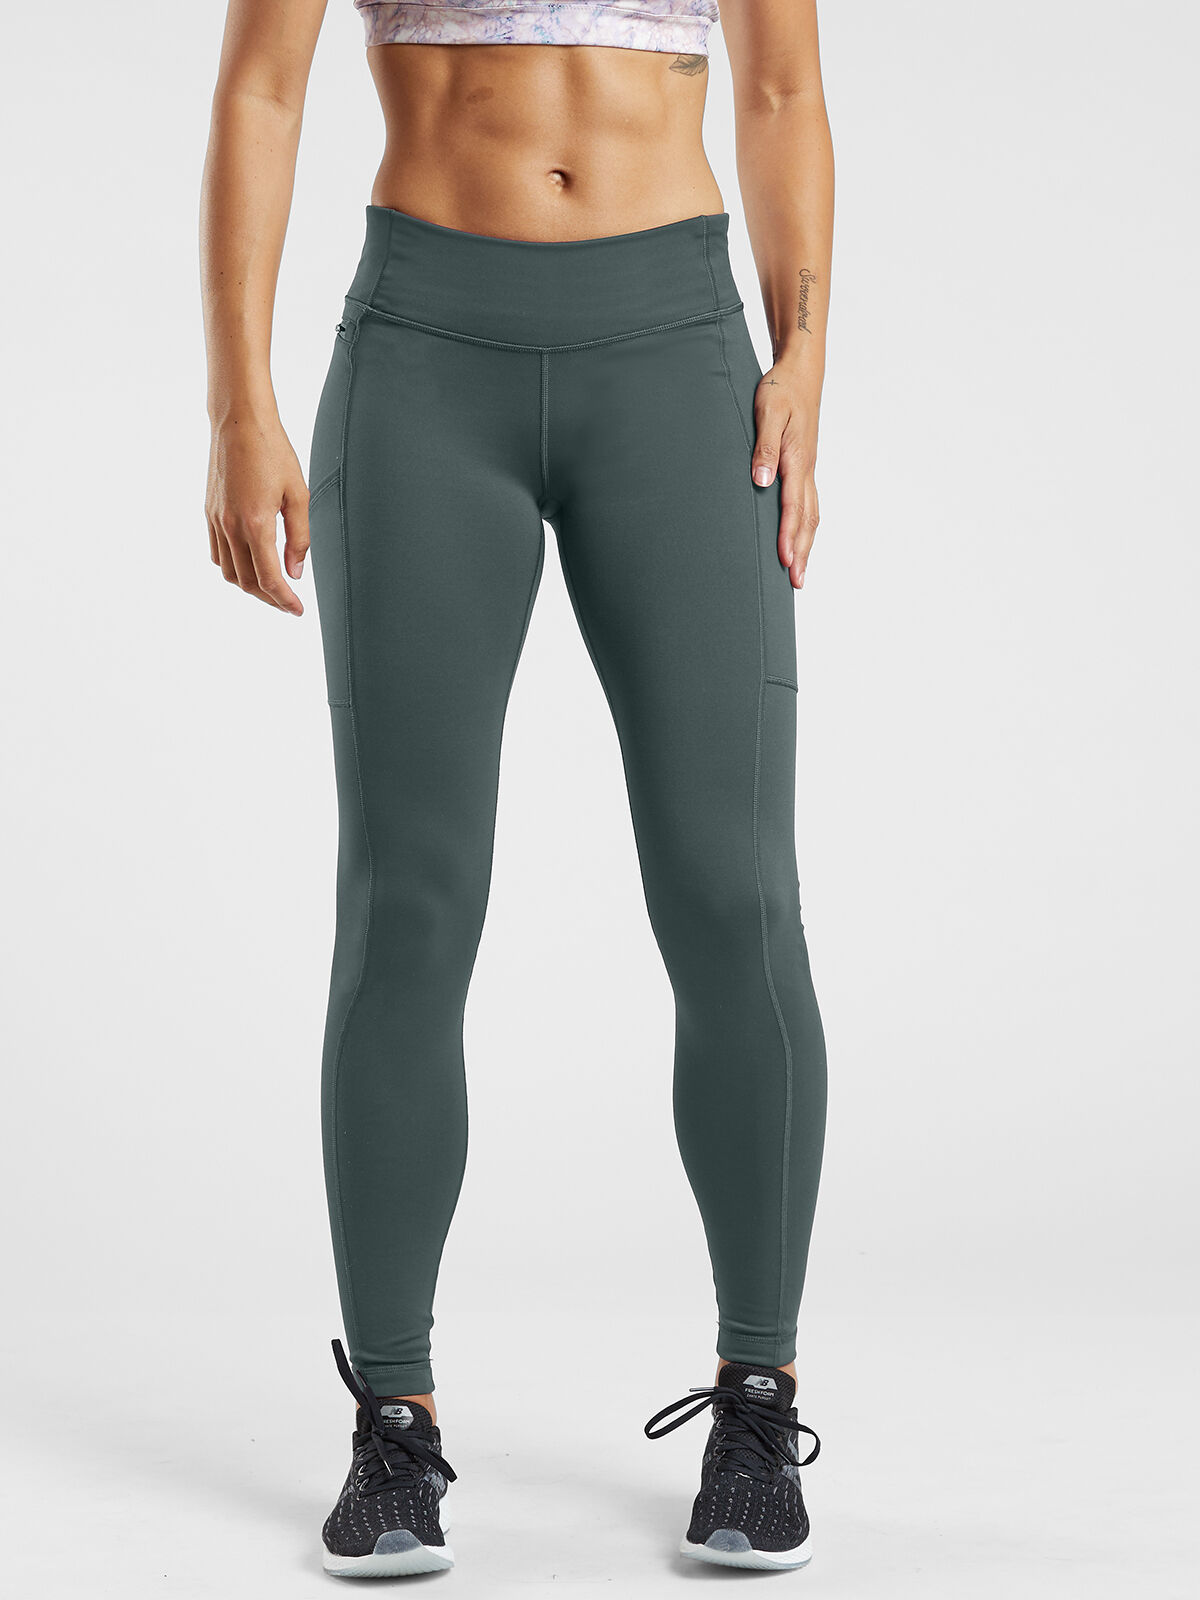 Intro Bella Solid Double Knit Slim Her Leggings | CoolSprings Galleria